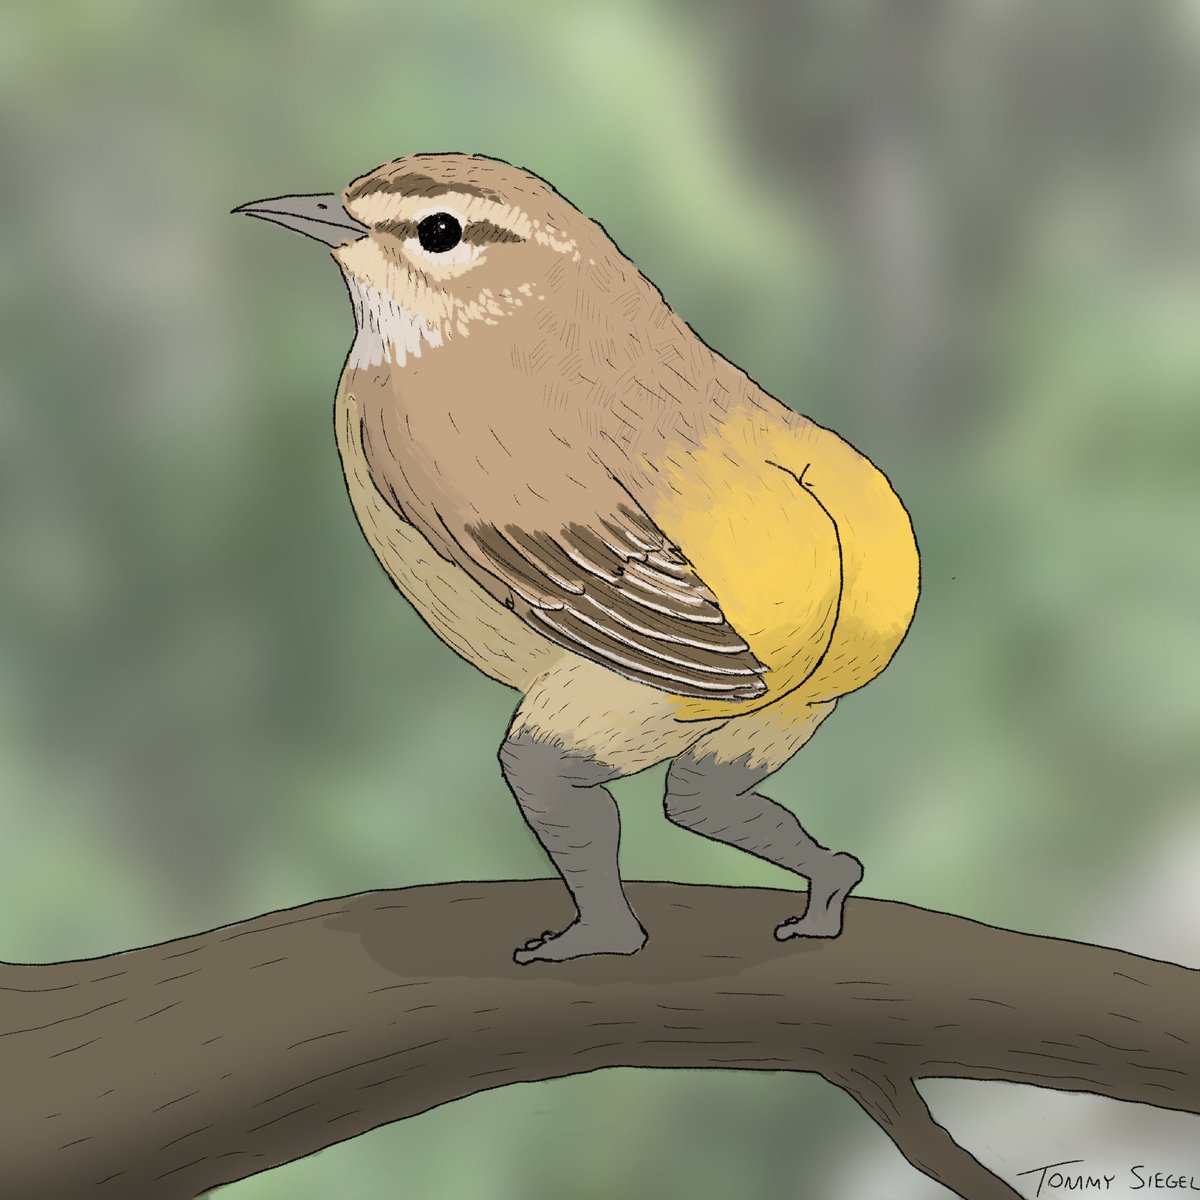 in celebration of earth day, i drew some birds i’ve been admiring while birdwatching in florida this spring. 

i tried to depict them as accurately as possible, but since i’m still fairly new to realism please let me know if you have any constructive criticism